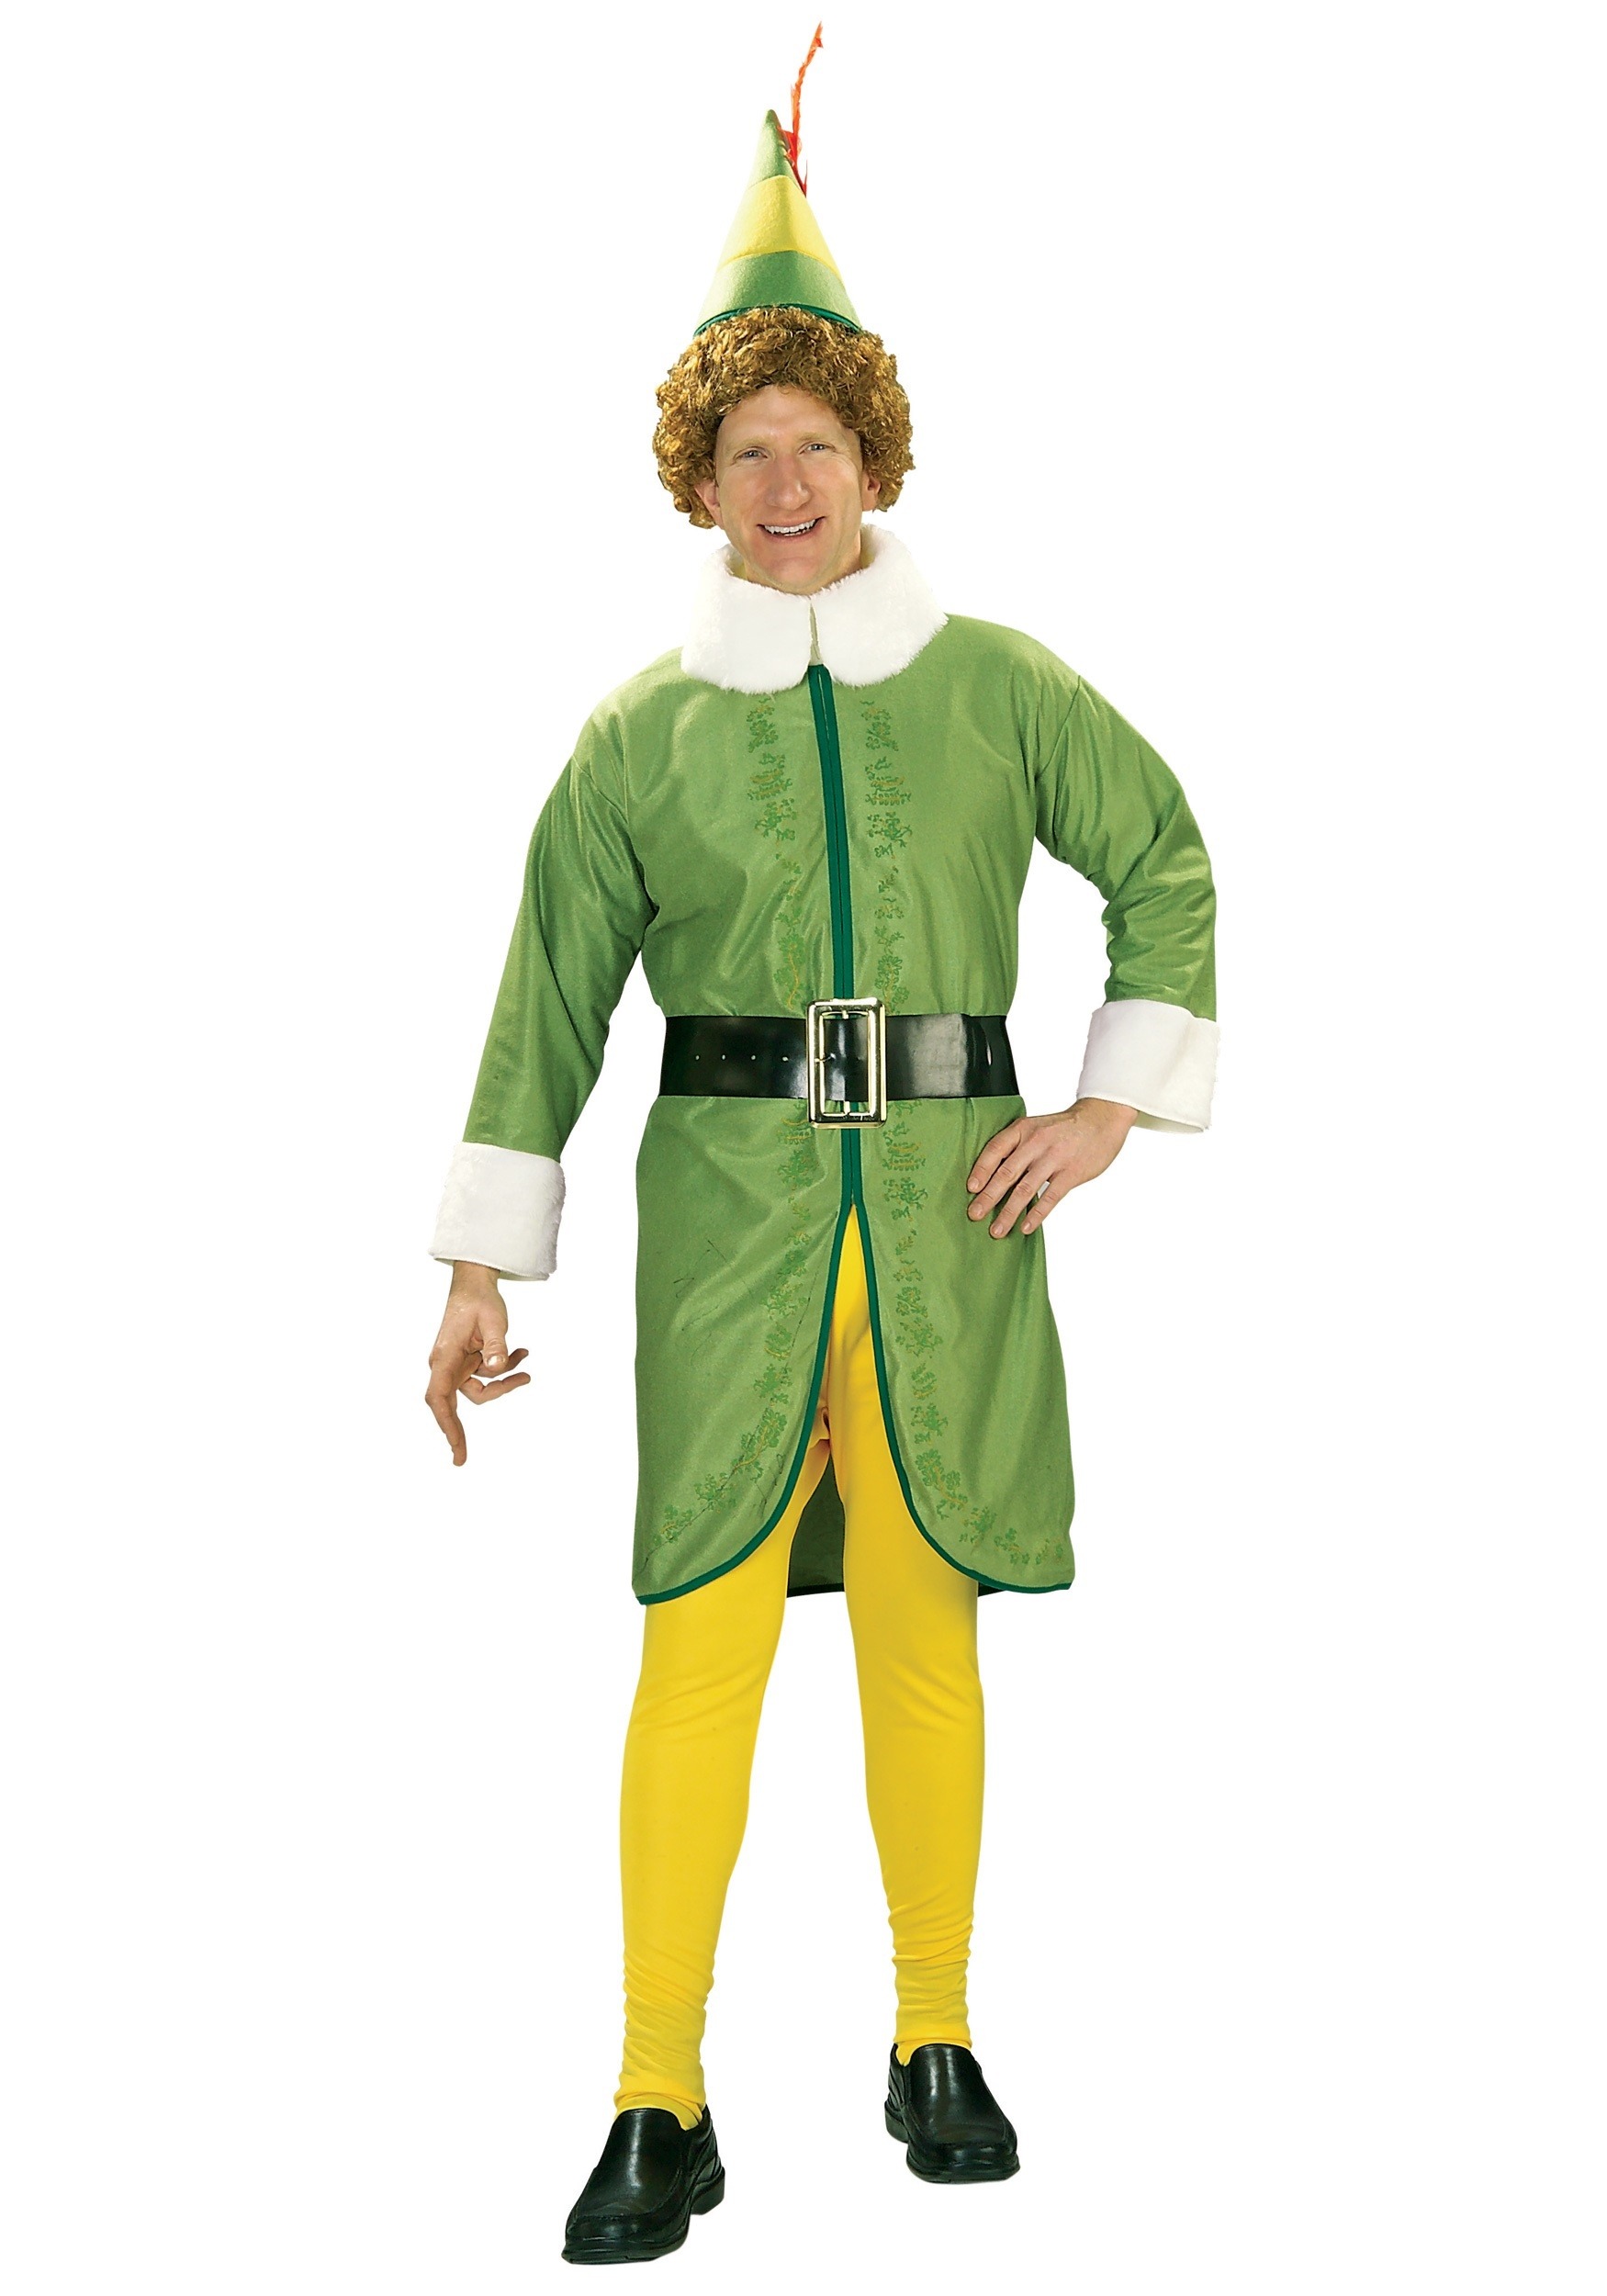 Image of Buddy the Elf Costume for Adults ID RU880419-M